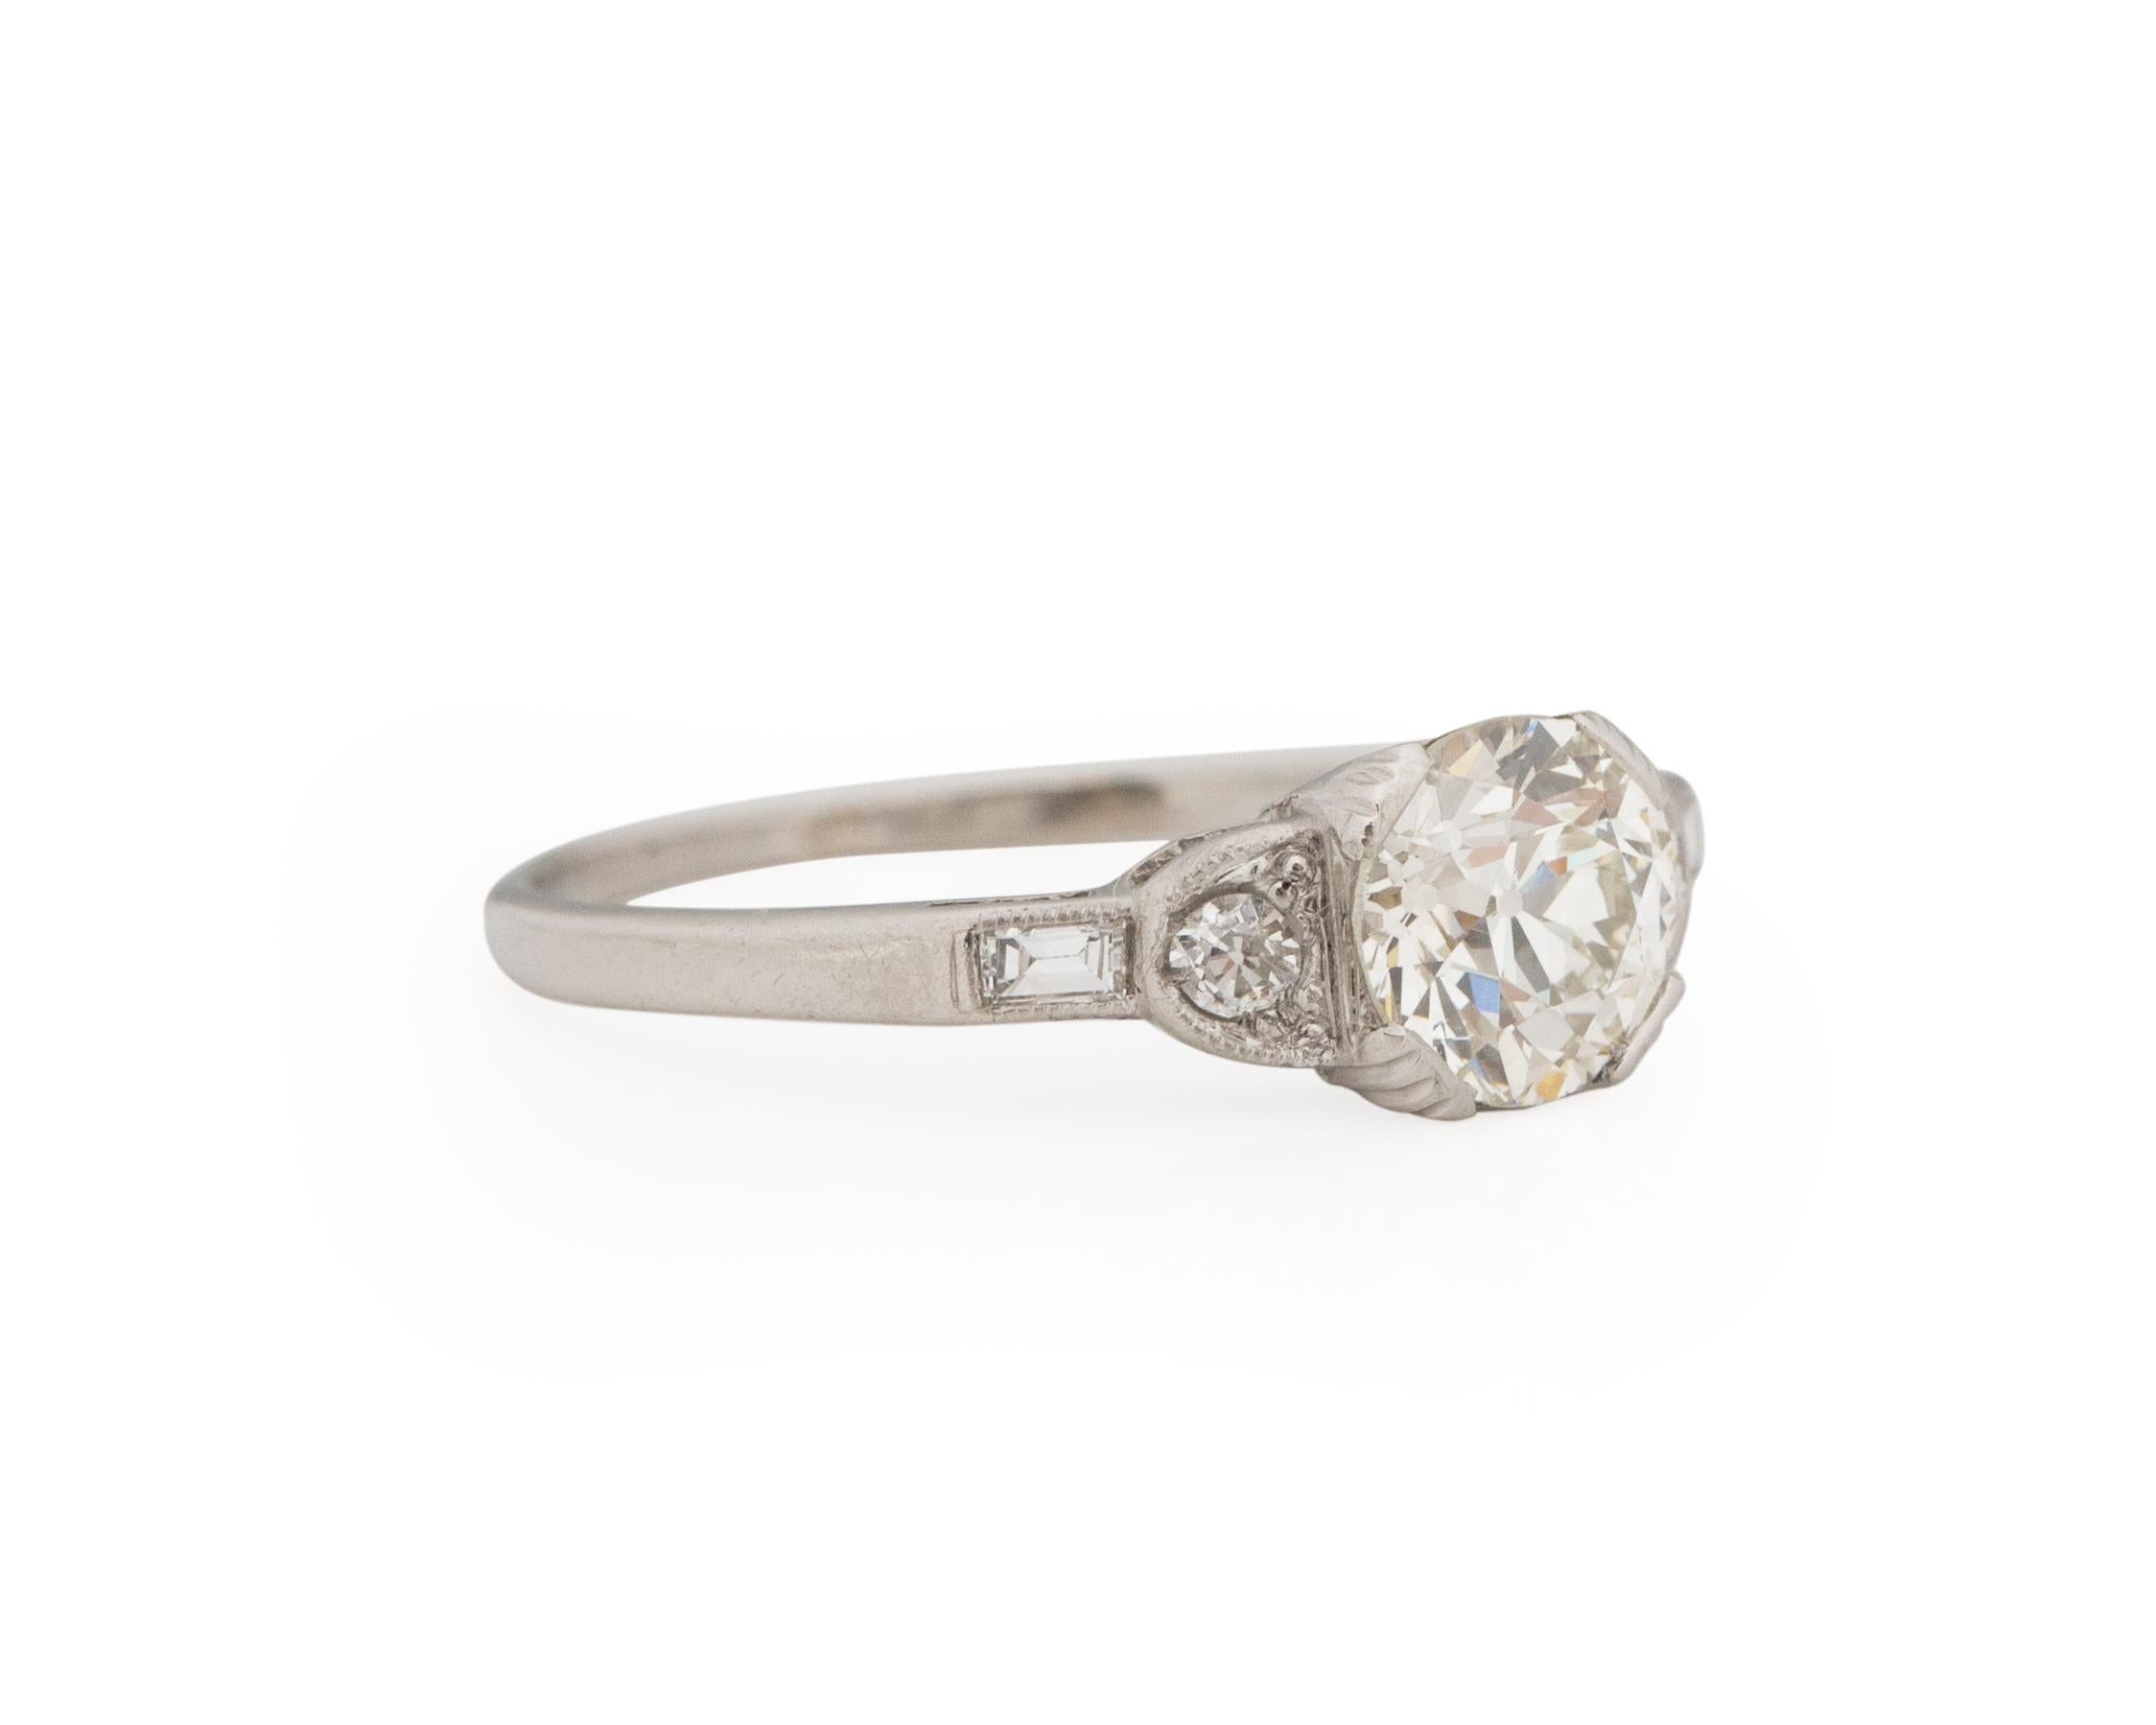 Ring Size: 6.75
Metal Type: Platinum [Hallmarked, and Tested]
Weight: 3.0 grams

Center Diamond Details:
GIA REPORT #: 2225084155
Weight: 1.04carat
Cut: Old European brilliant
Color: L
Clarity: VS1
Measurements: 6.42mm x 6.32mm x 4.09mmm

Side Stone